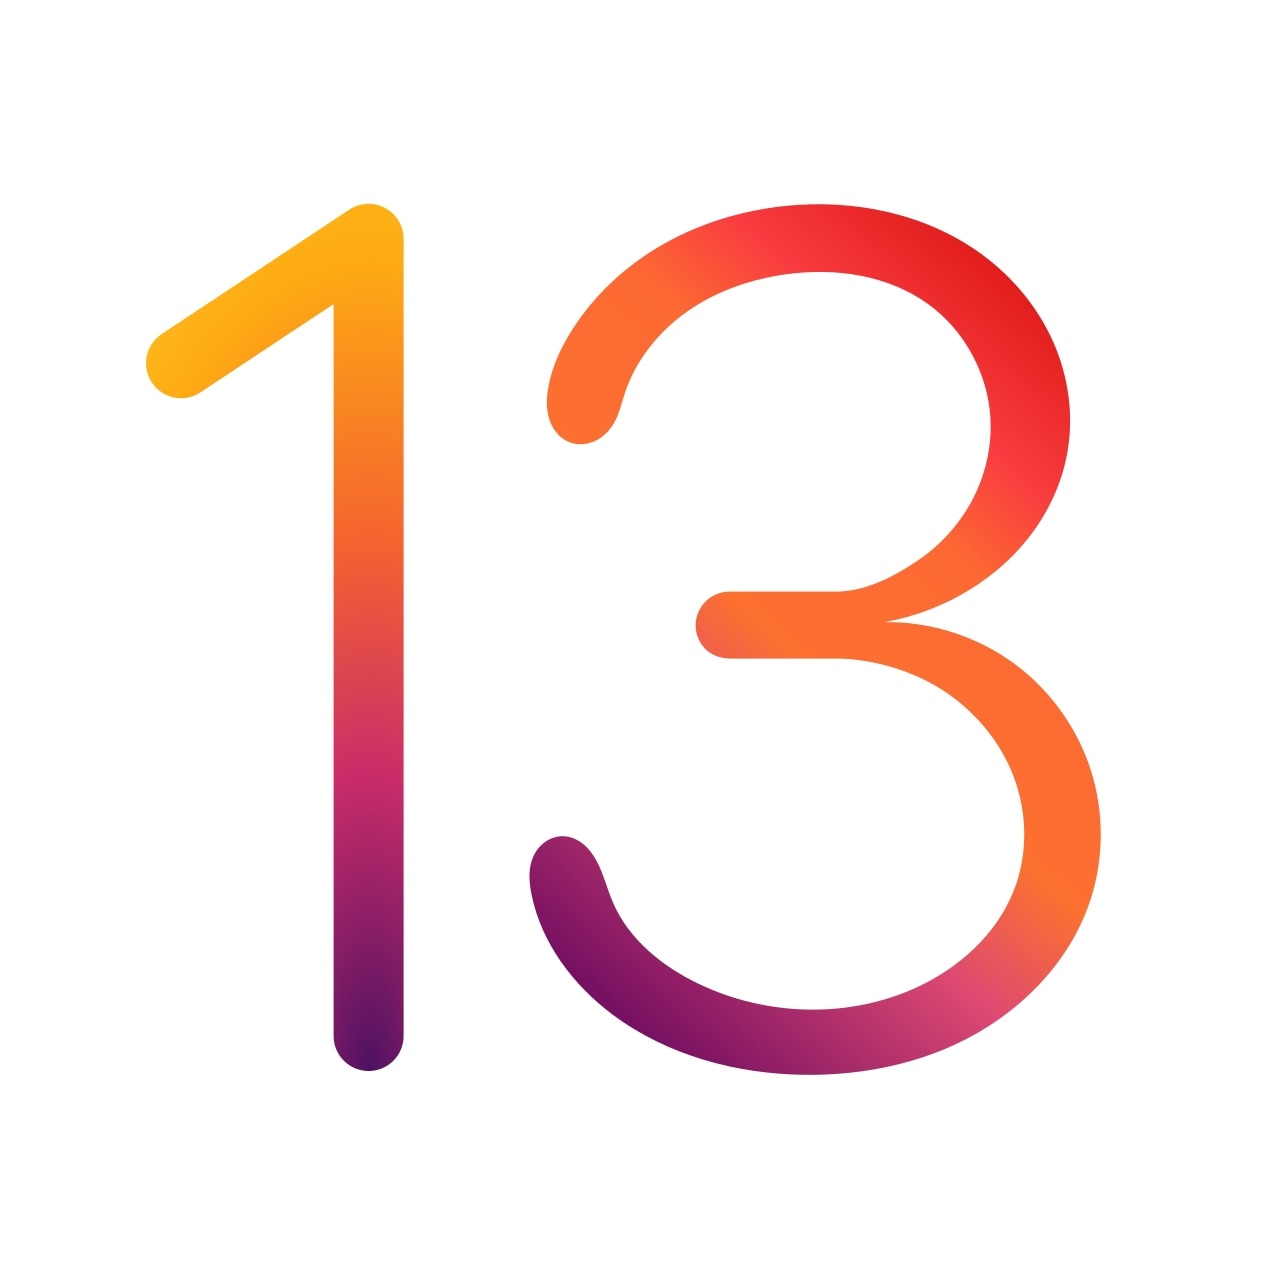 Downgrades From iOS 13.5 Halted as Apple Stops Signing iOS 13.4.1